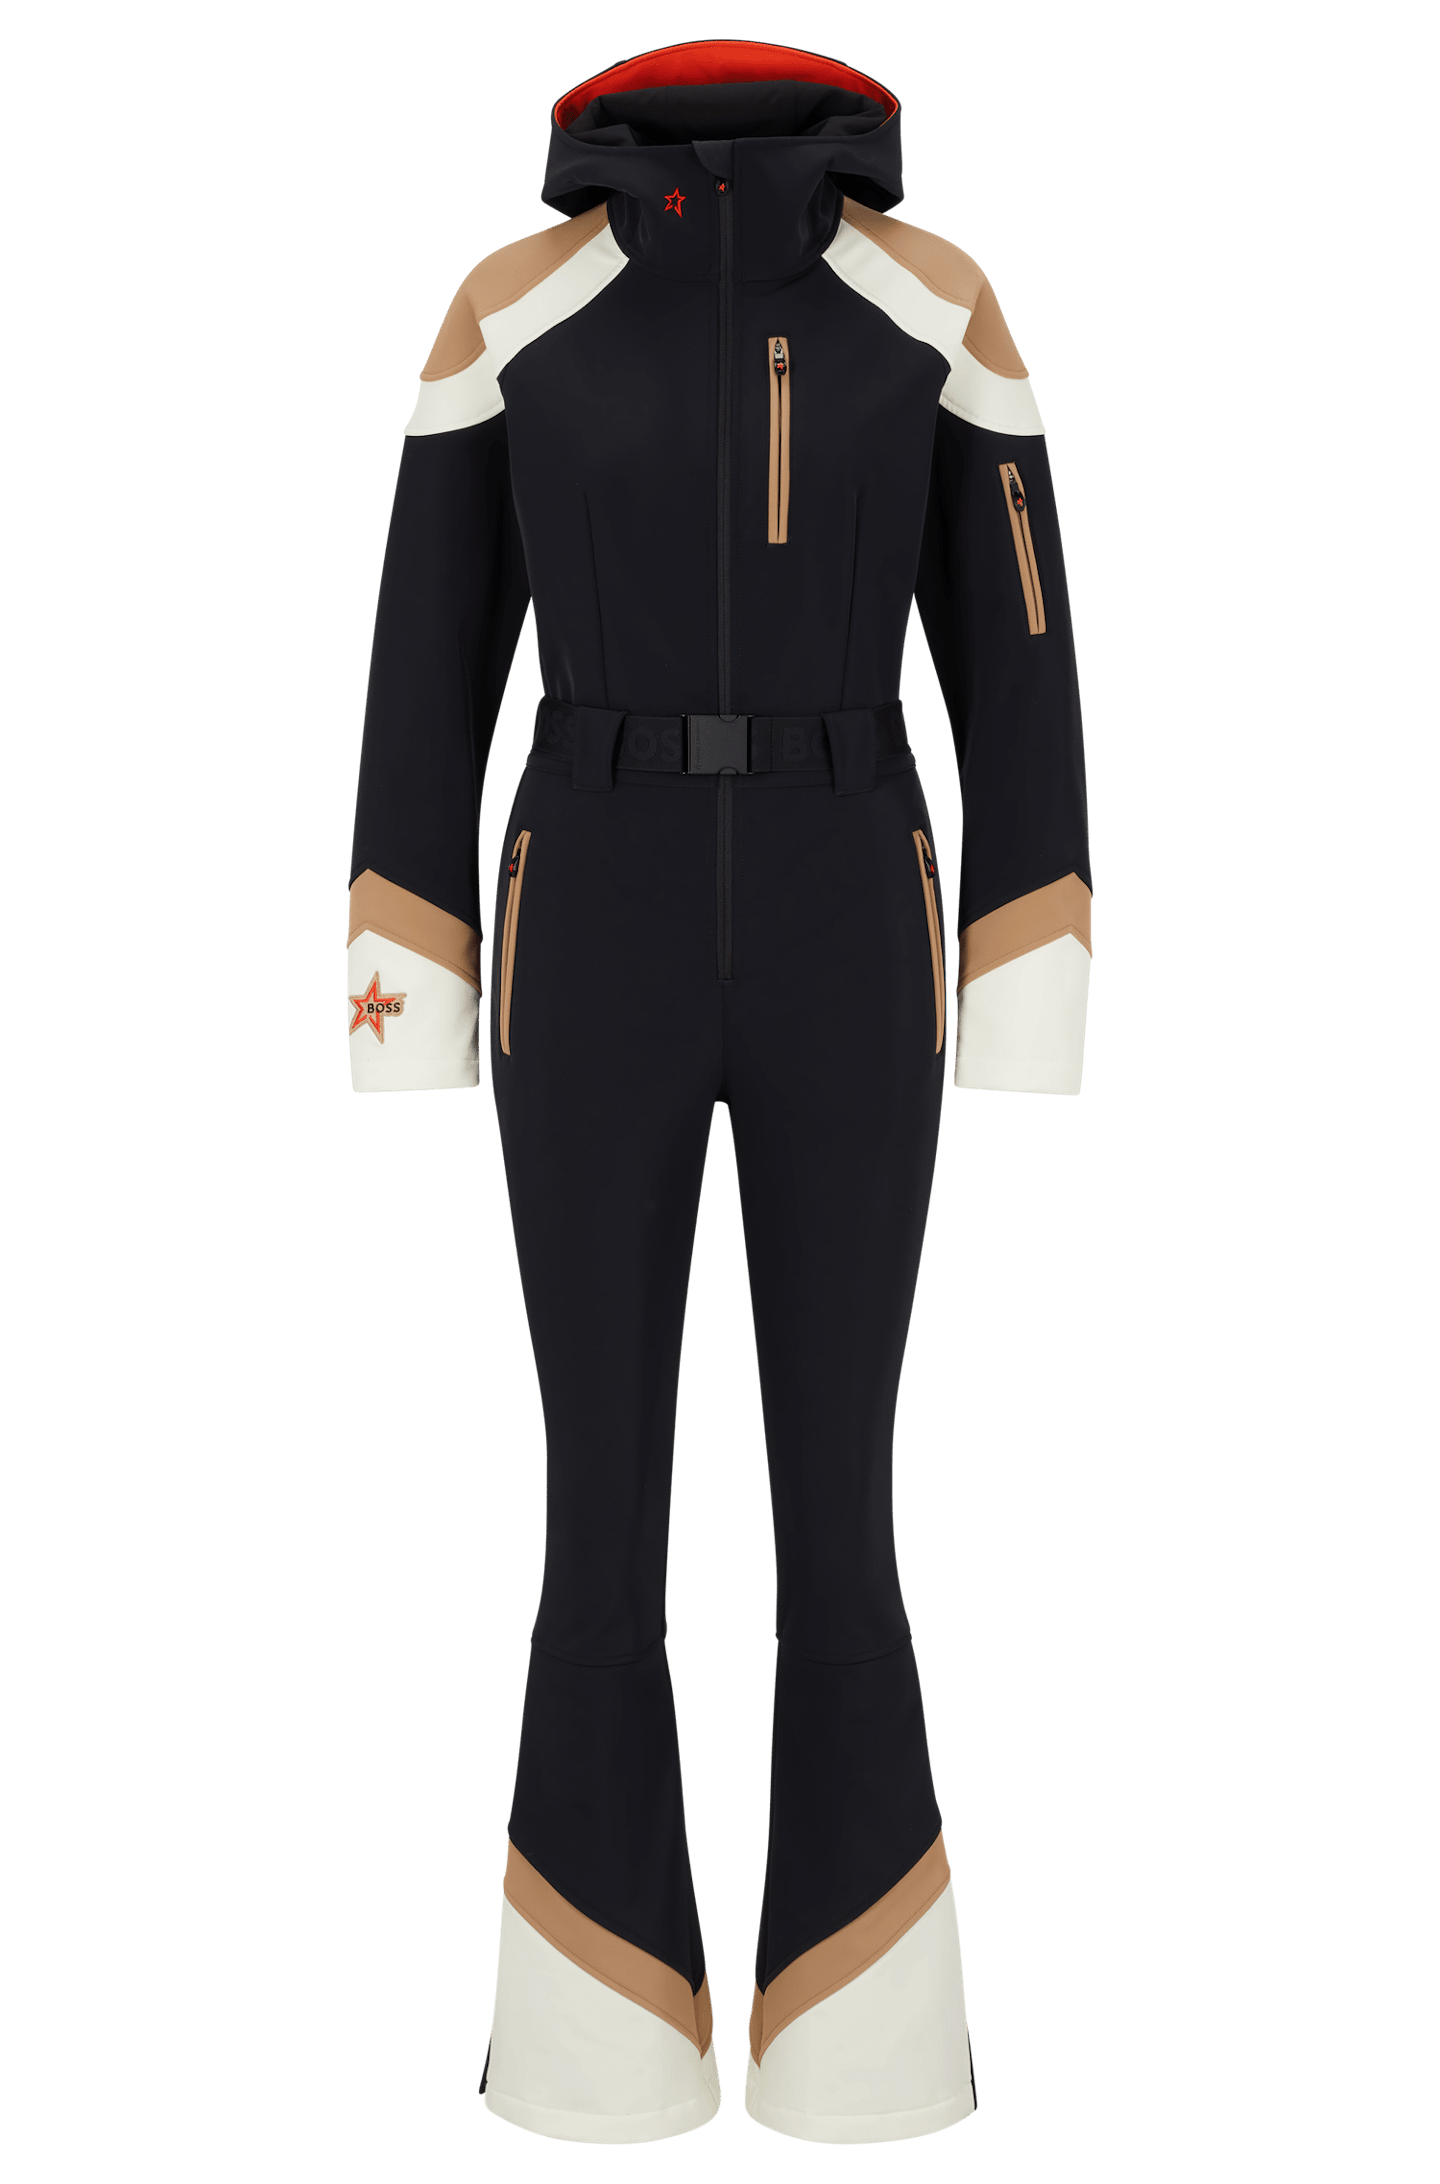 Black Hooded Boot-Cut Ski Suit With Branding 